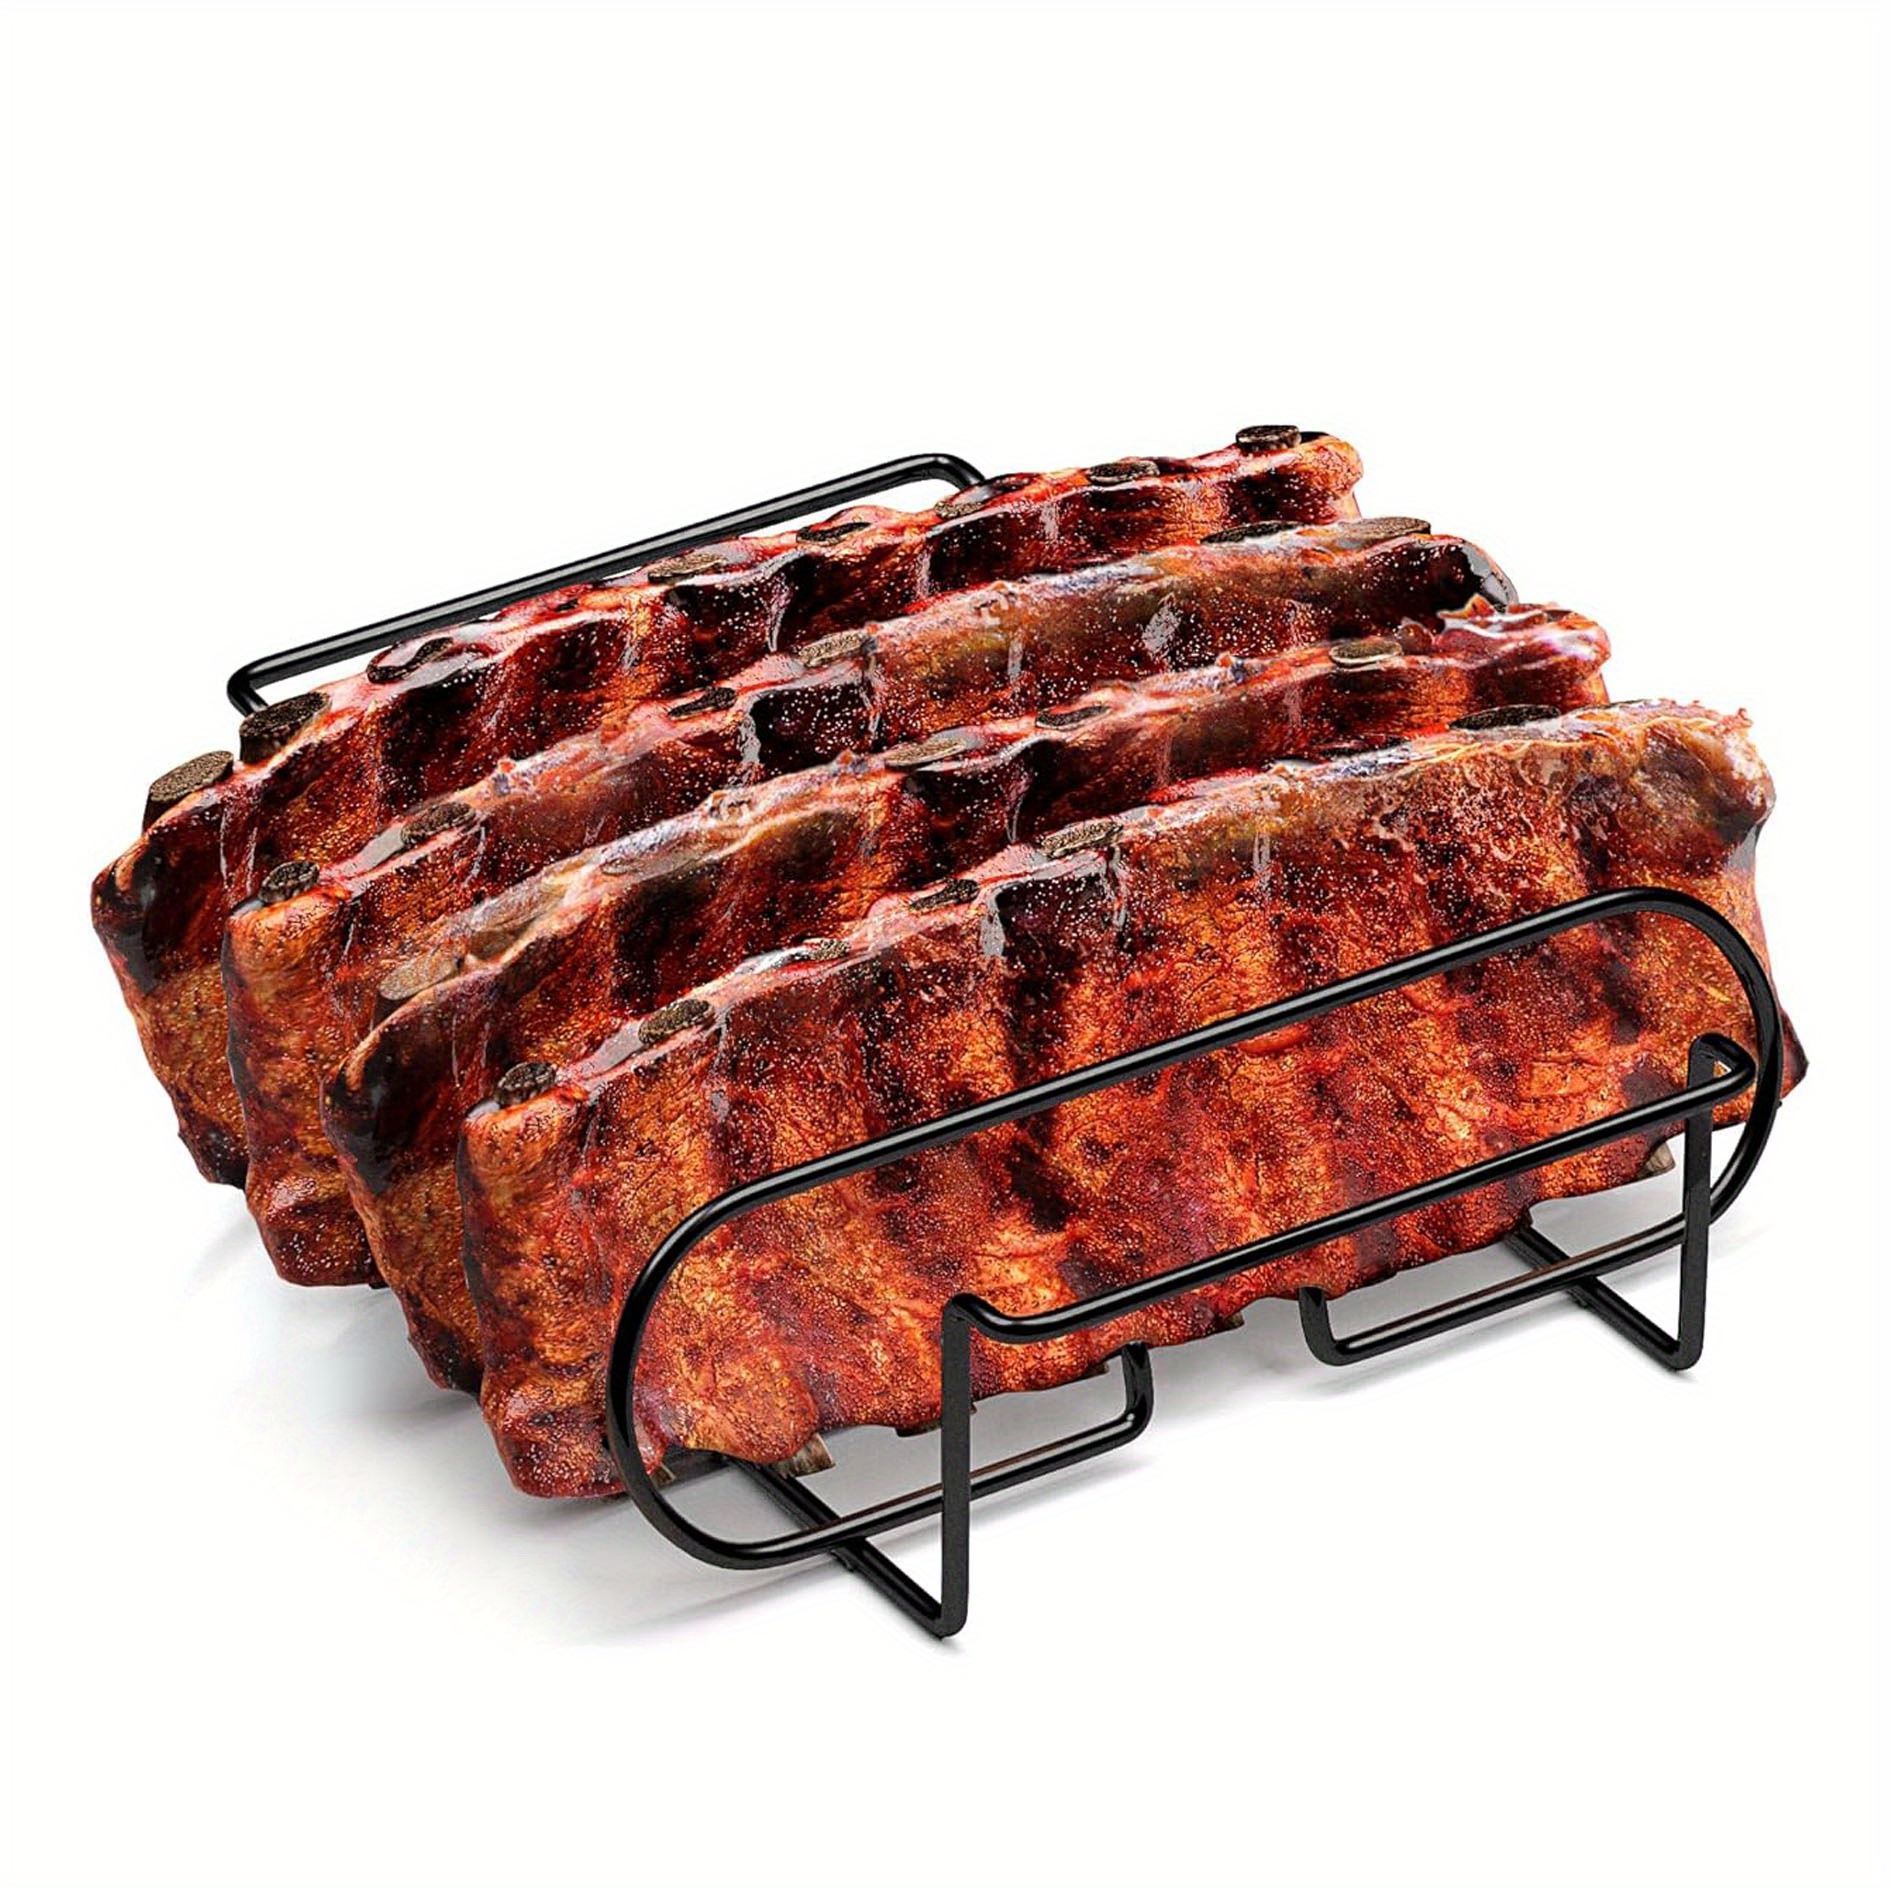 Extra Long Stainless Steel Rib Rack for Smoking and Grilling